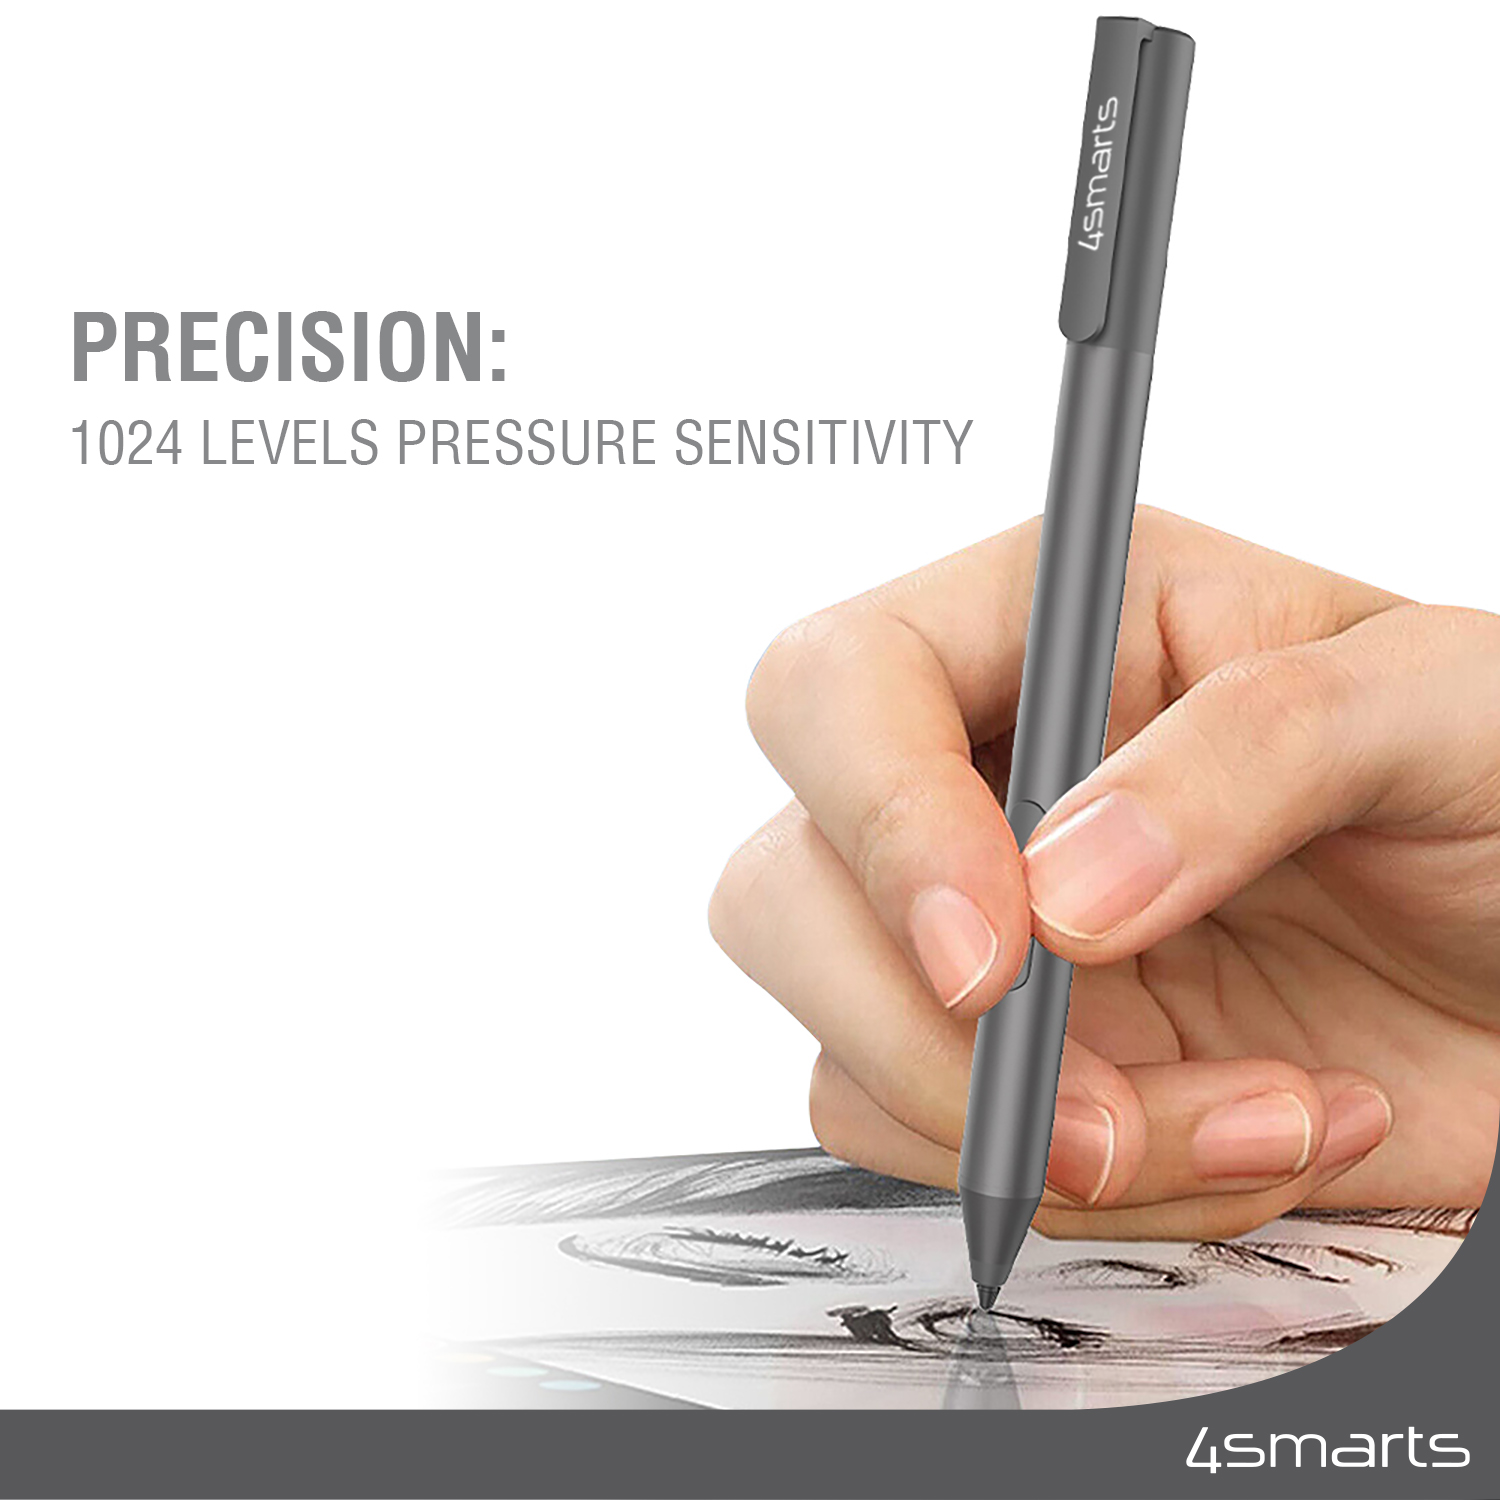 The stylus pen has 1024 levels of pressure sensitivity and responds to your every move with absolute precision.